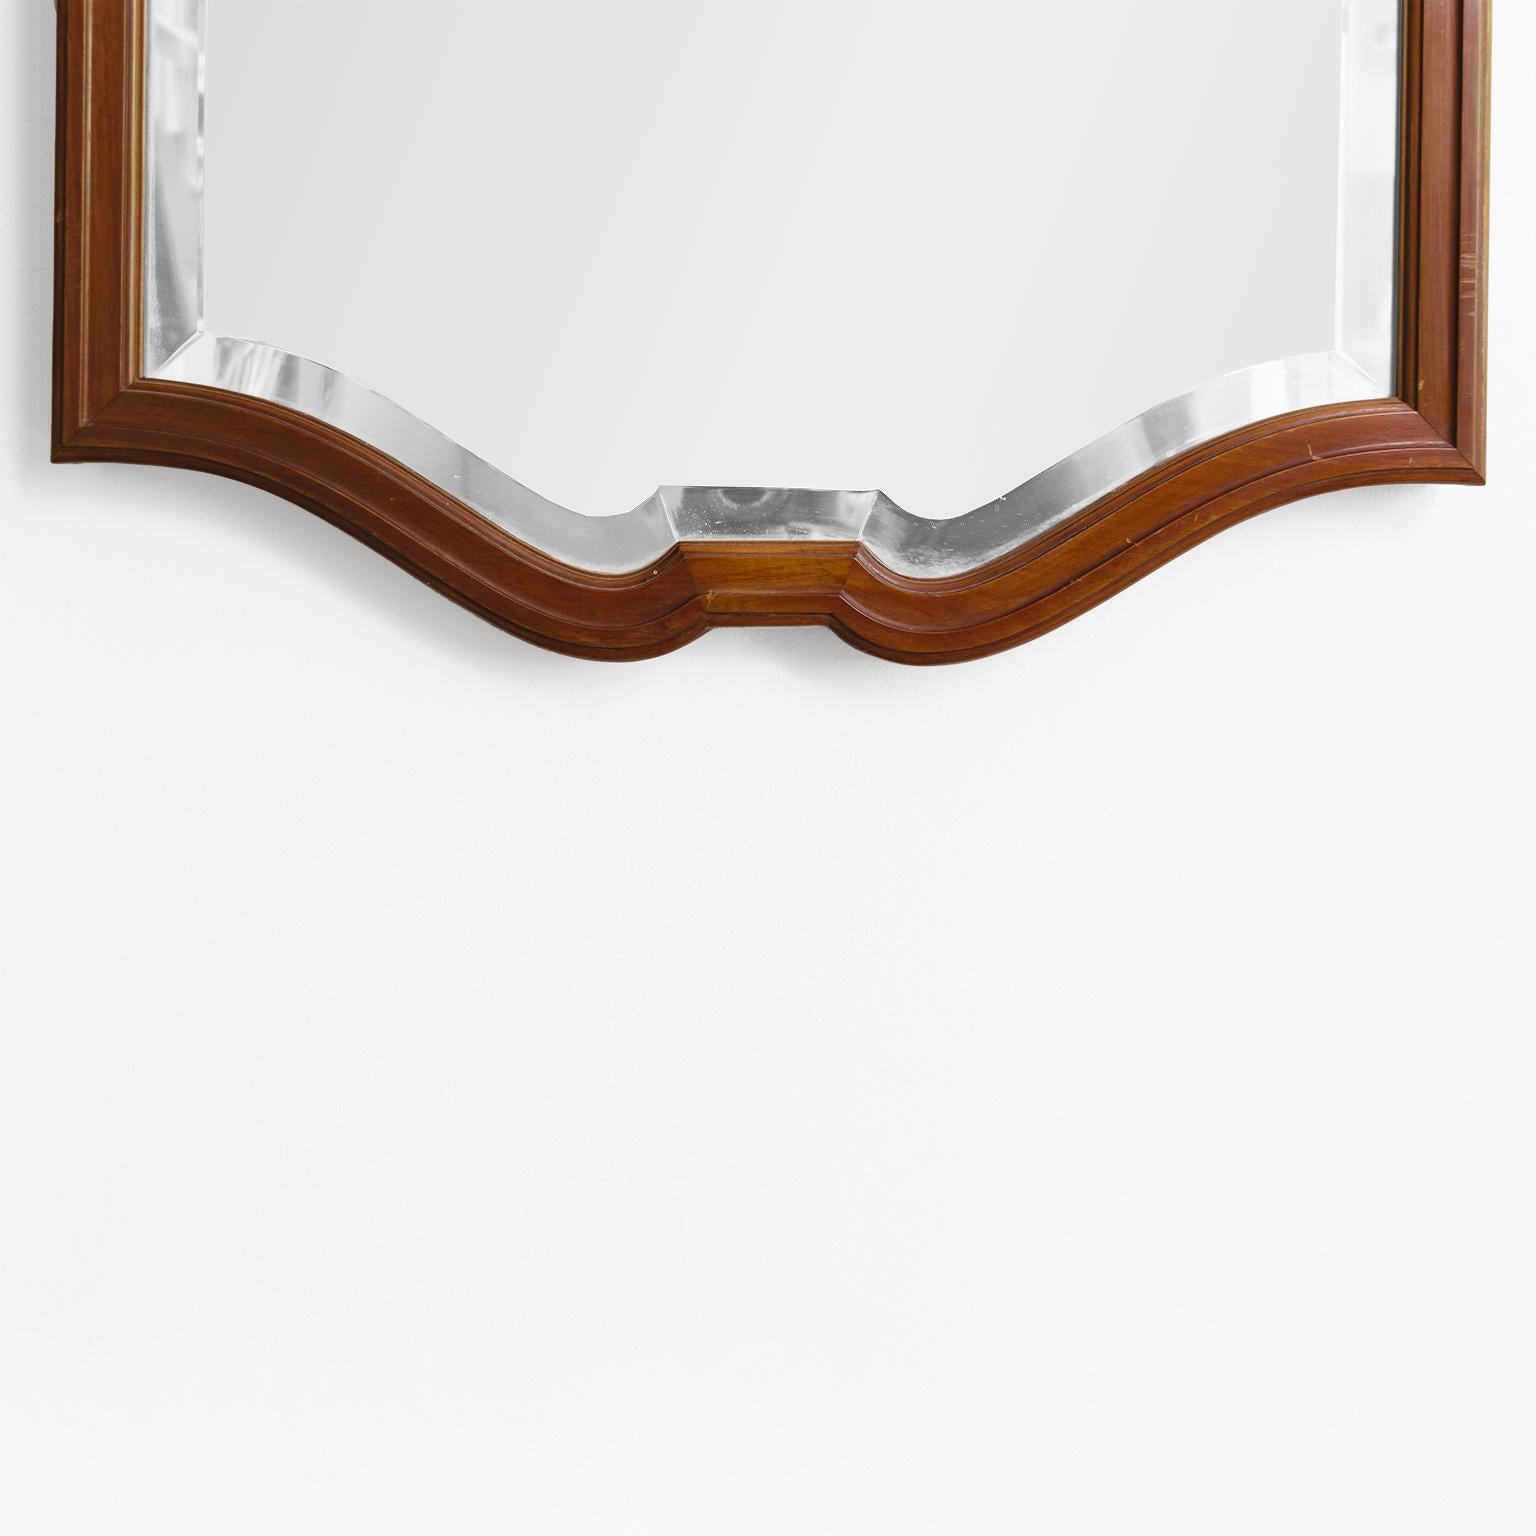 20th Century Swedish Grace Carved Mahogany Mirror Topped With a Female, Circa, 1920-30